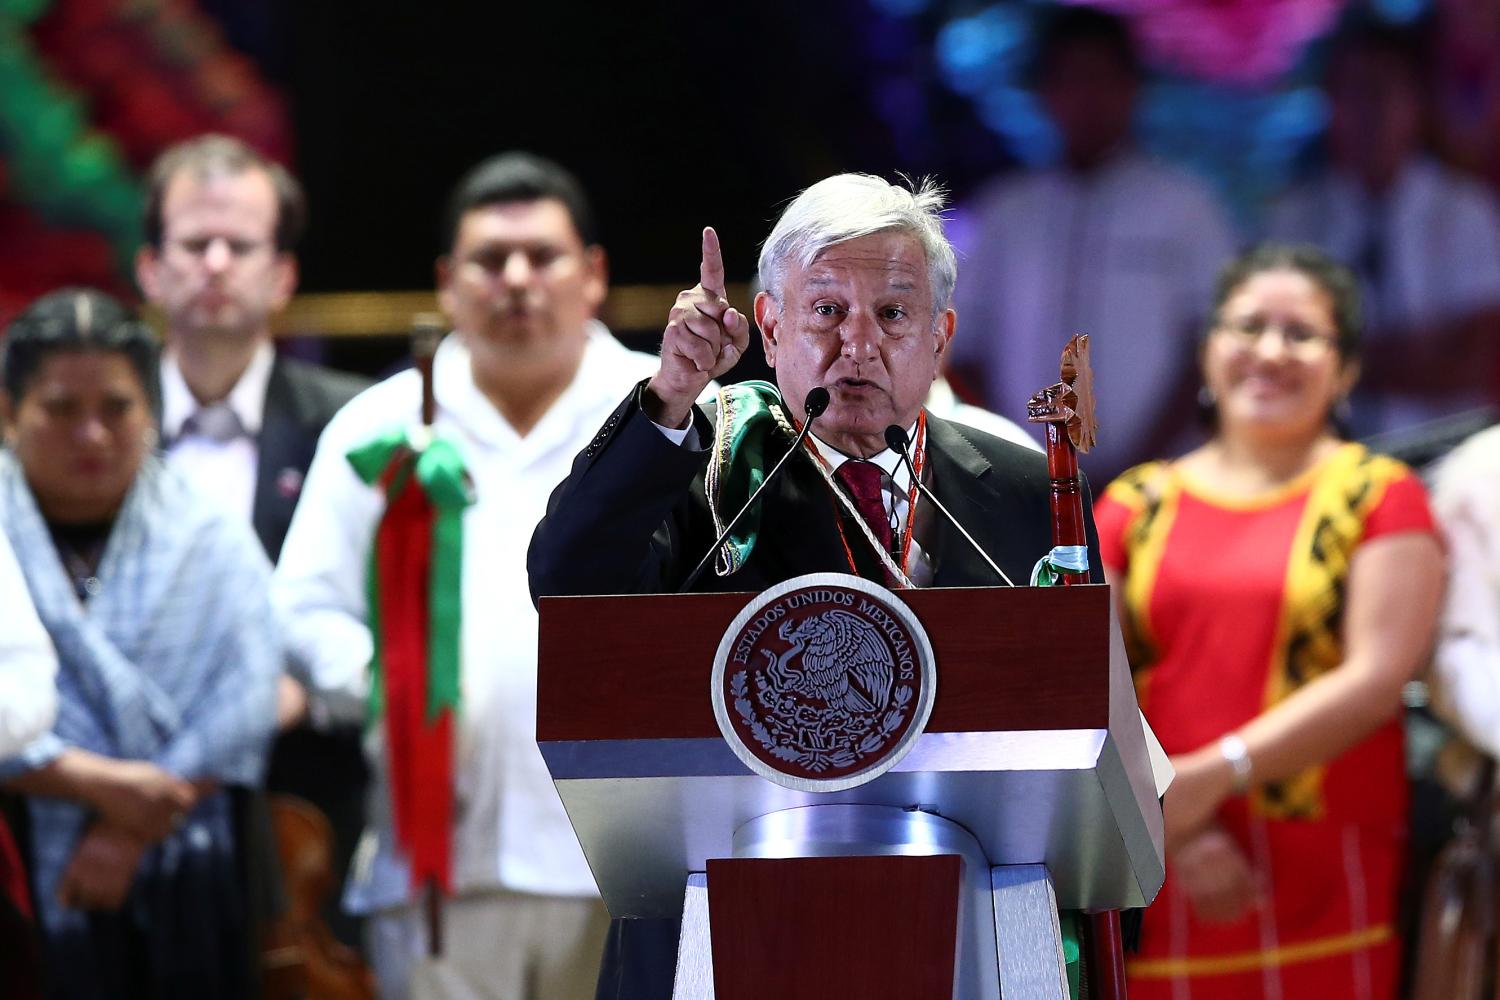 Mexico's President Andres Manuel Lopez Obrador addresses supporters after receiving the staff of command from indigenous people during the AMLO Fest at Zocalo square in Mexico City, Mexico December 1, 2018. Picture taken December 1, 2018. REUTERS/Edgard Garrido